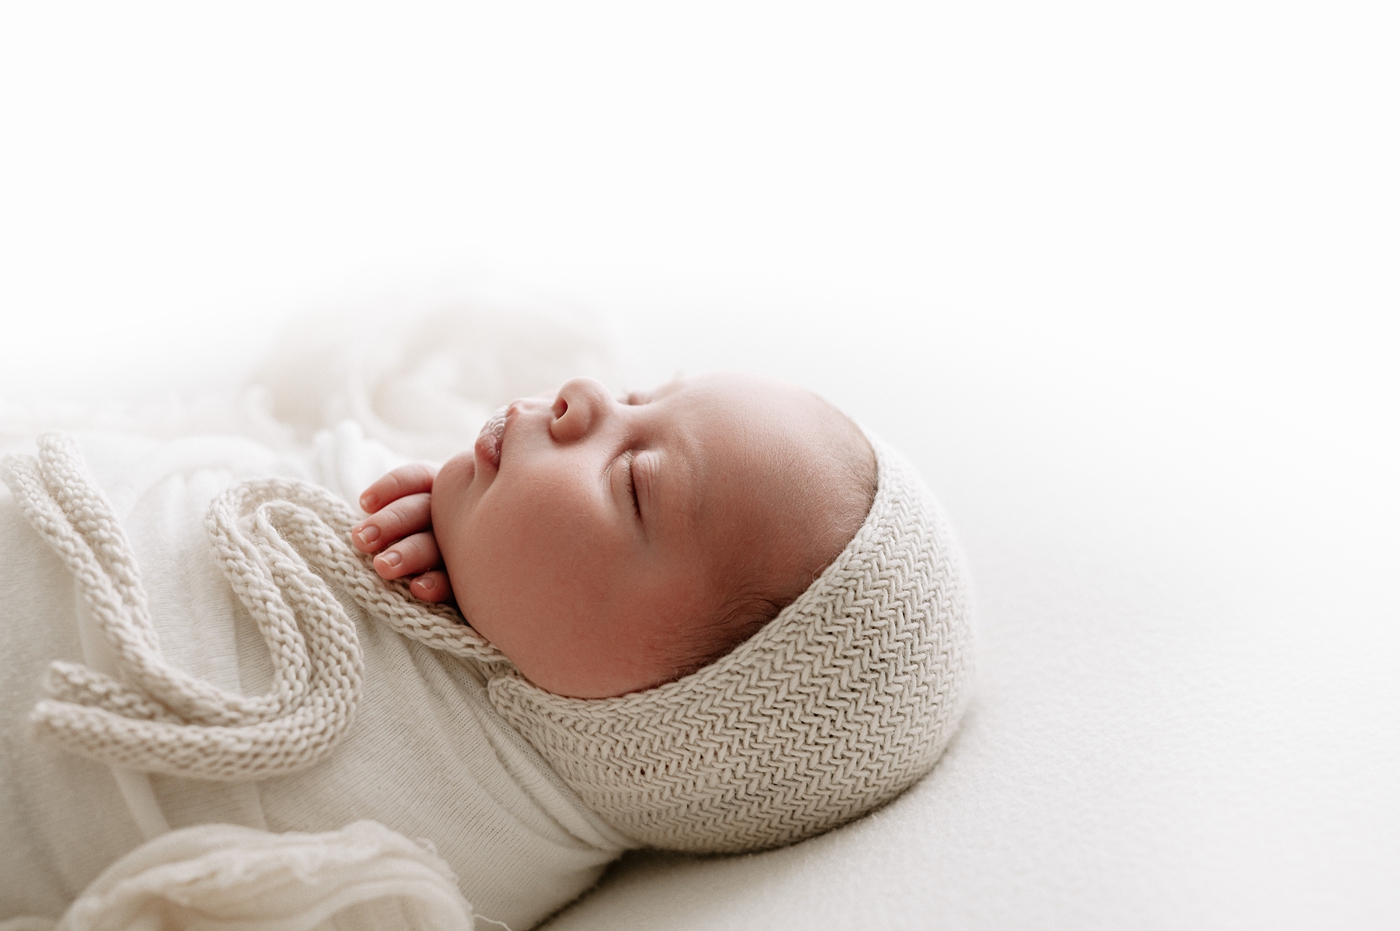 Profile of baby boy during his newborn session. Photo by Meg Newton Photography.